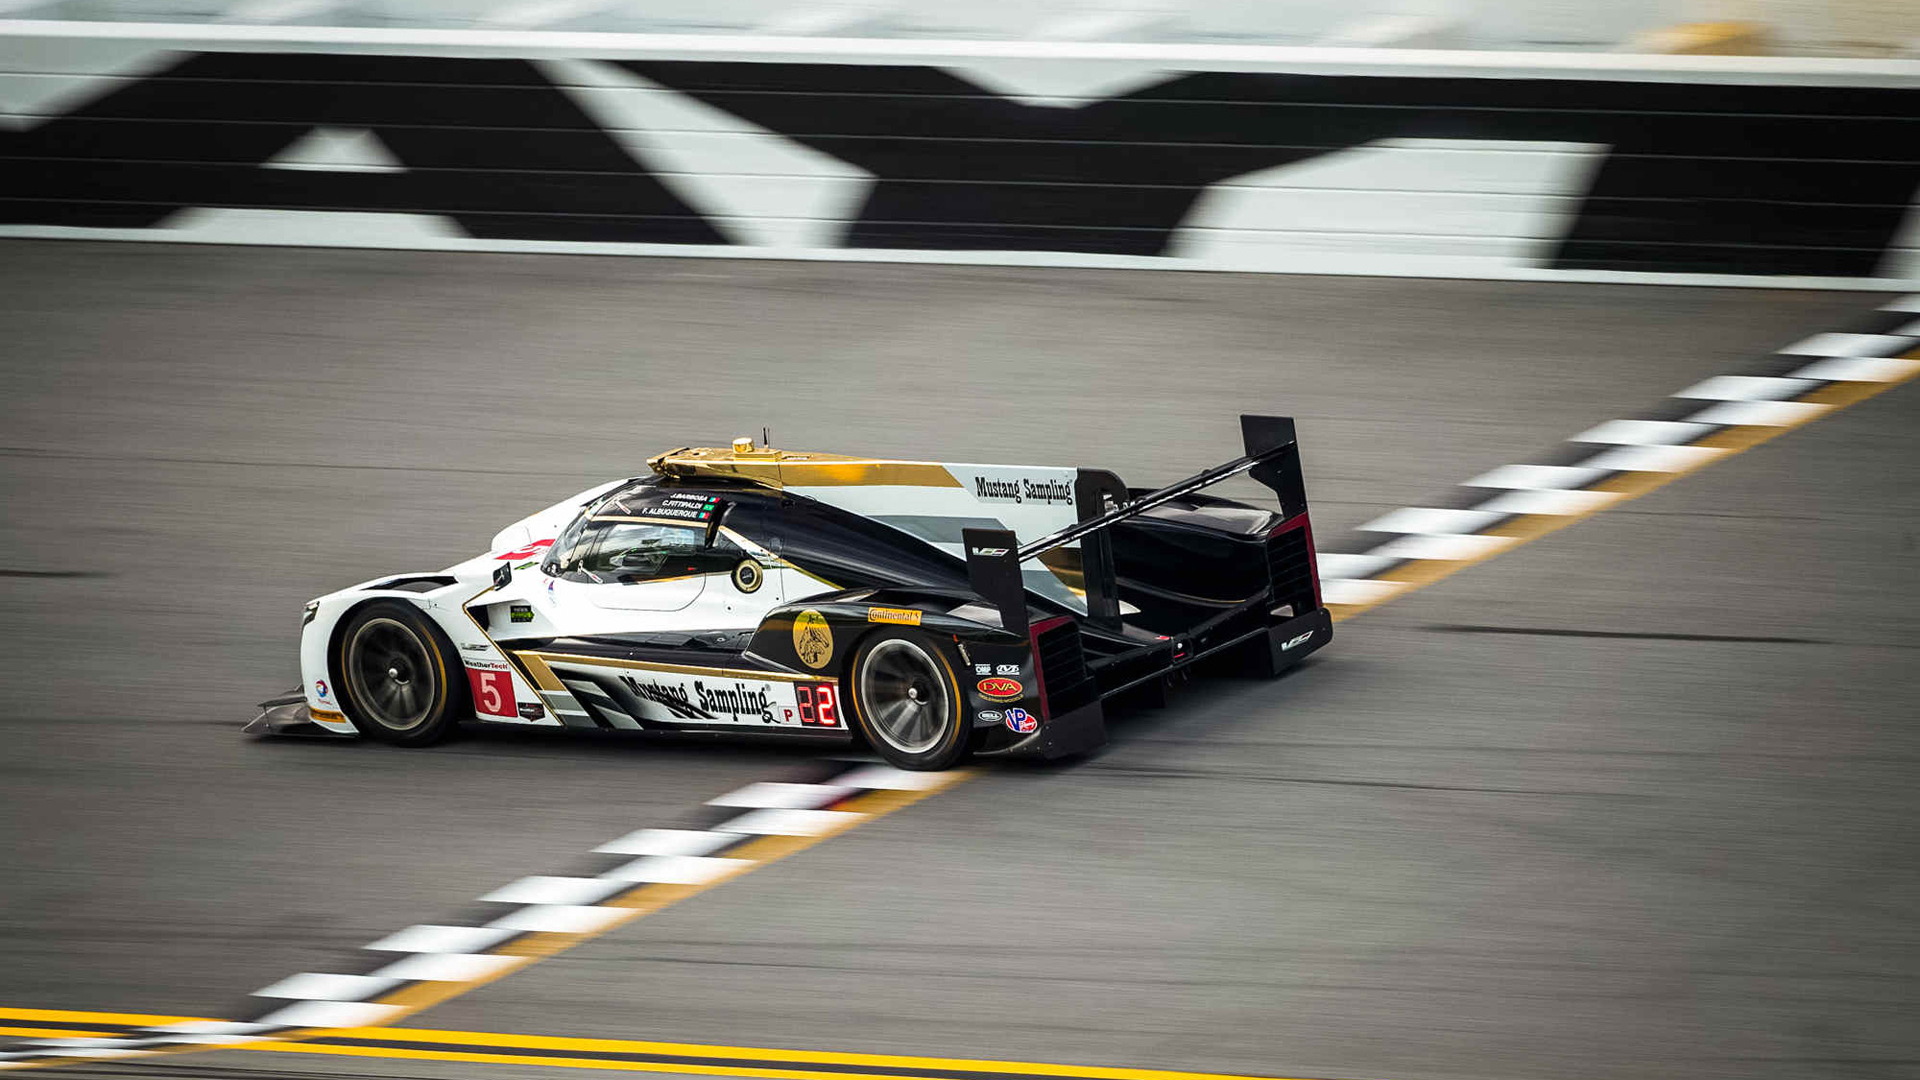 Joao Barbosa in the Cadillac DPi-V.R secures pole for 2017 24 Hours of Daytona